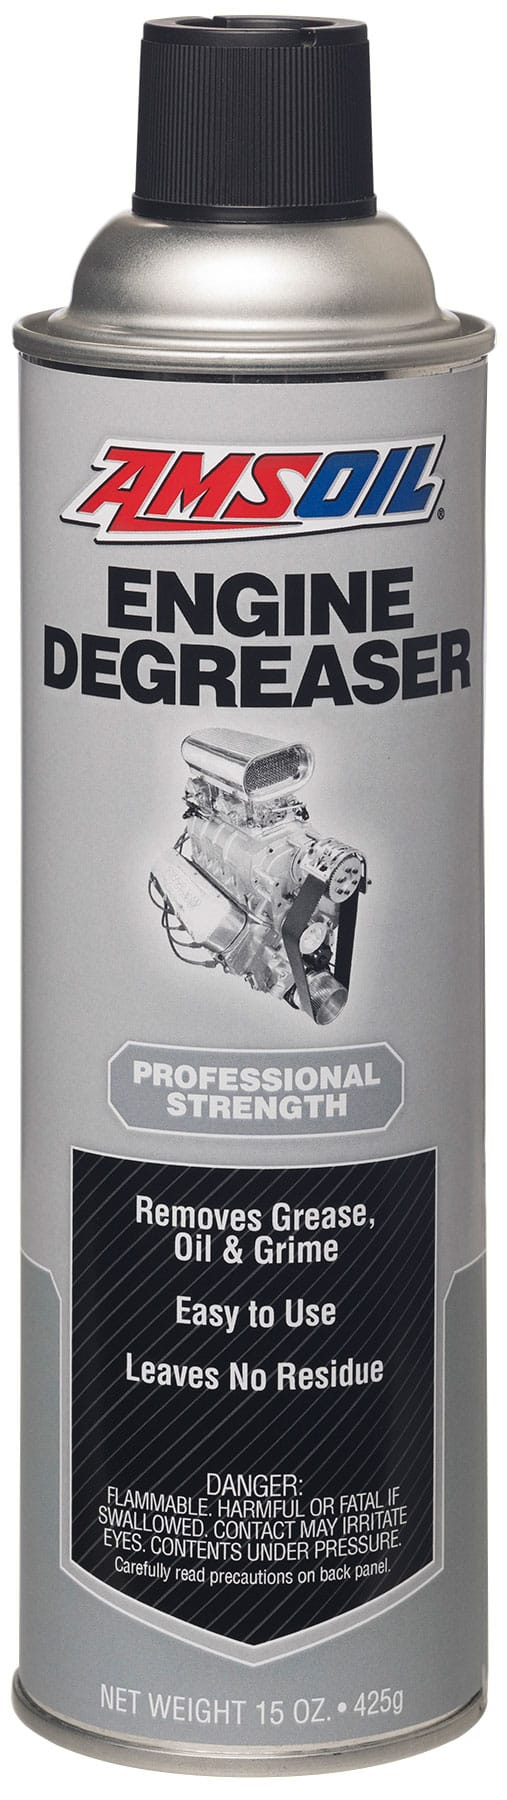 A can of AMSOIL Engine Degreaser, which contains degreasing solvents that easily remove the toughest grease, dirt and grime from engine surfaces.